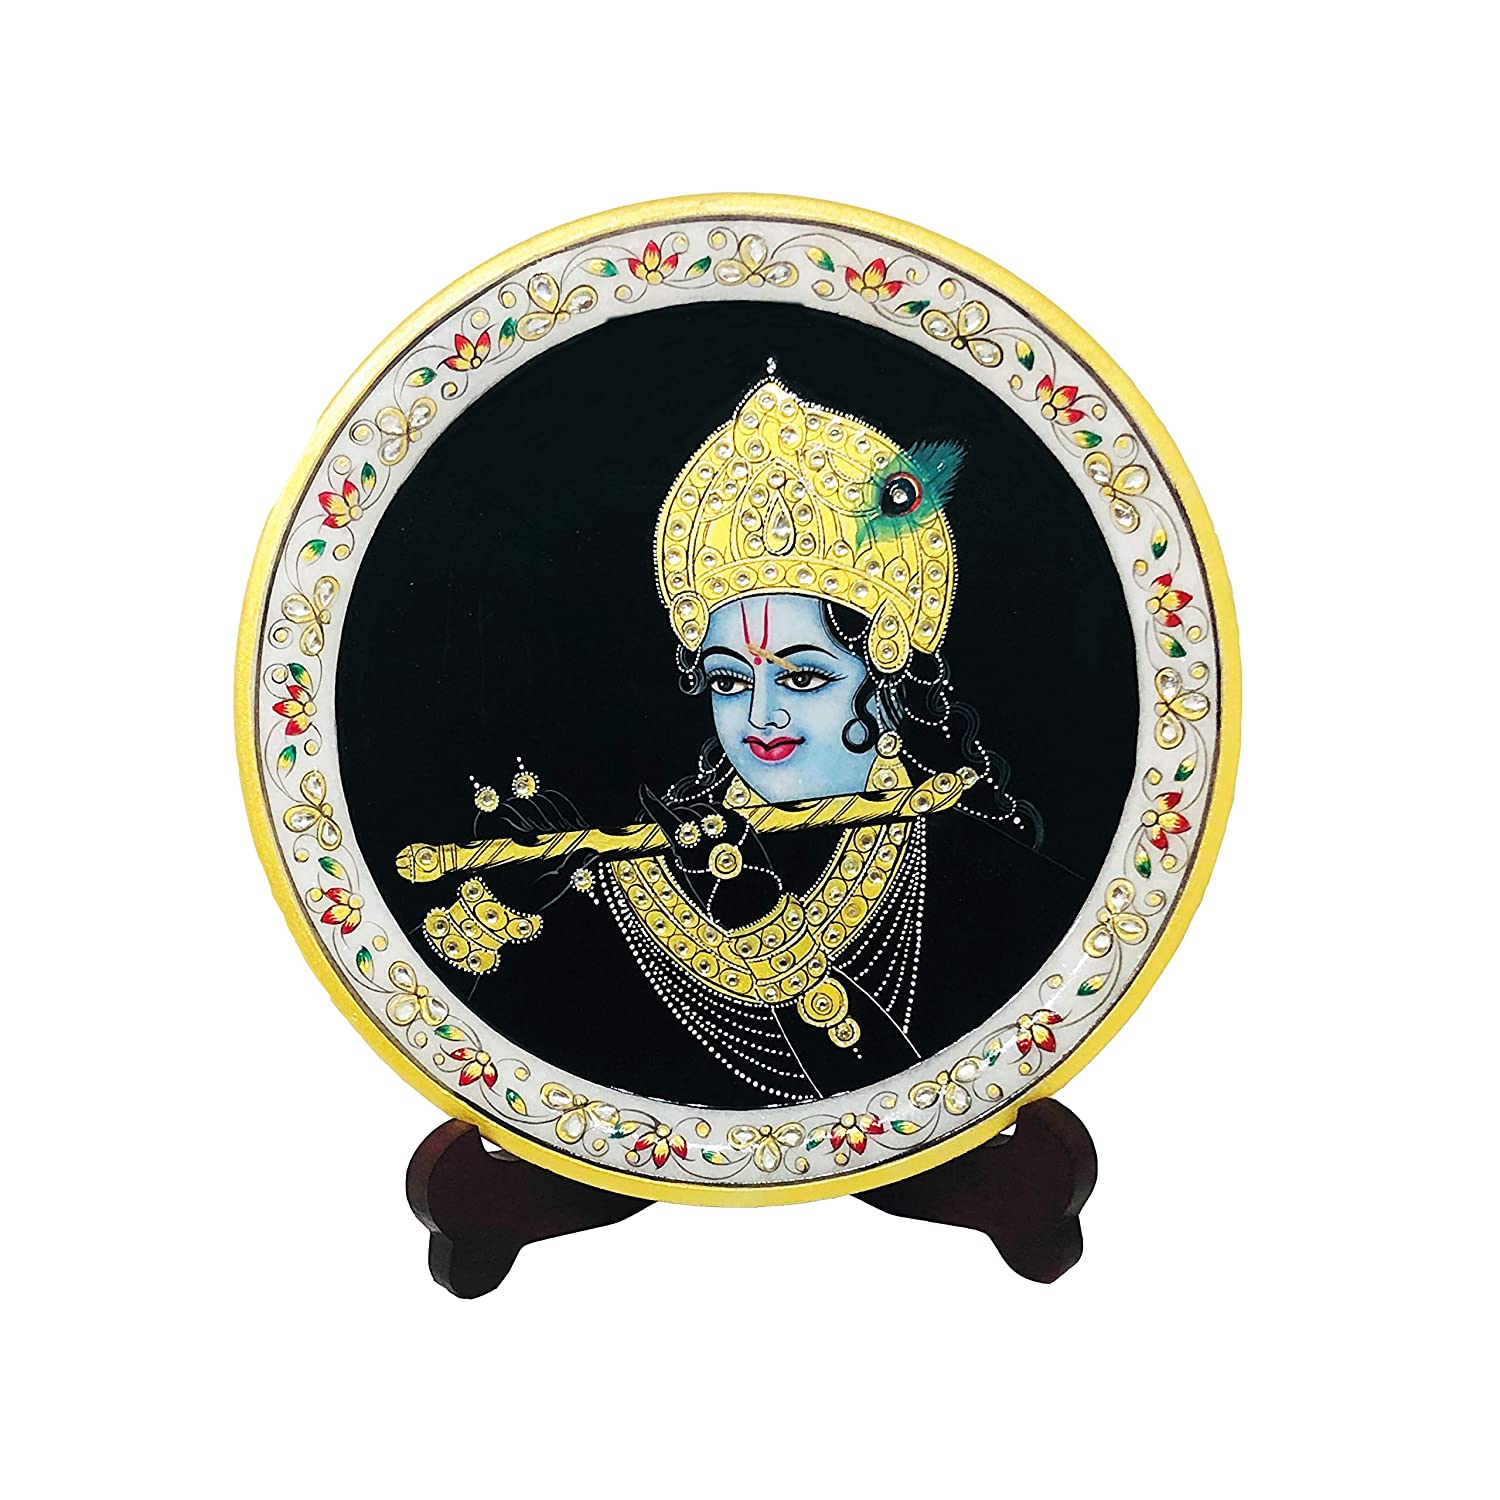 Handcrafted Decorative Lord Krishna Painted On Marble Plate for Home Decor,Table Decor (Dia : 9 Inches, Multicolor) 